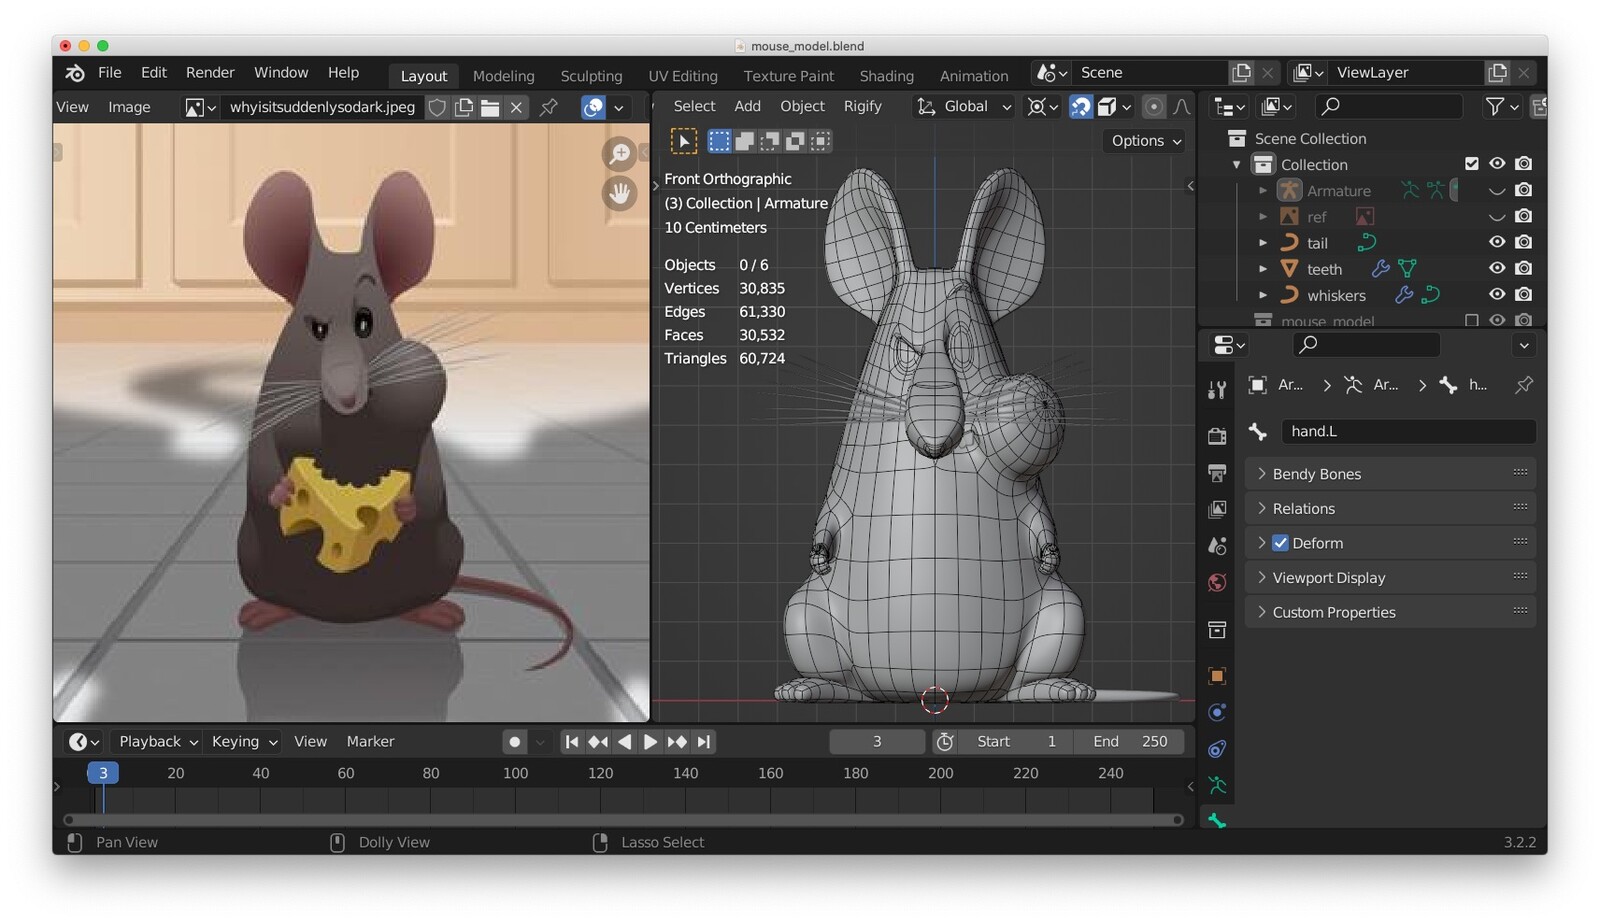 Modeling the mouse with the original Illustrator image as reference